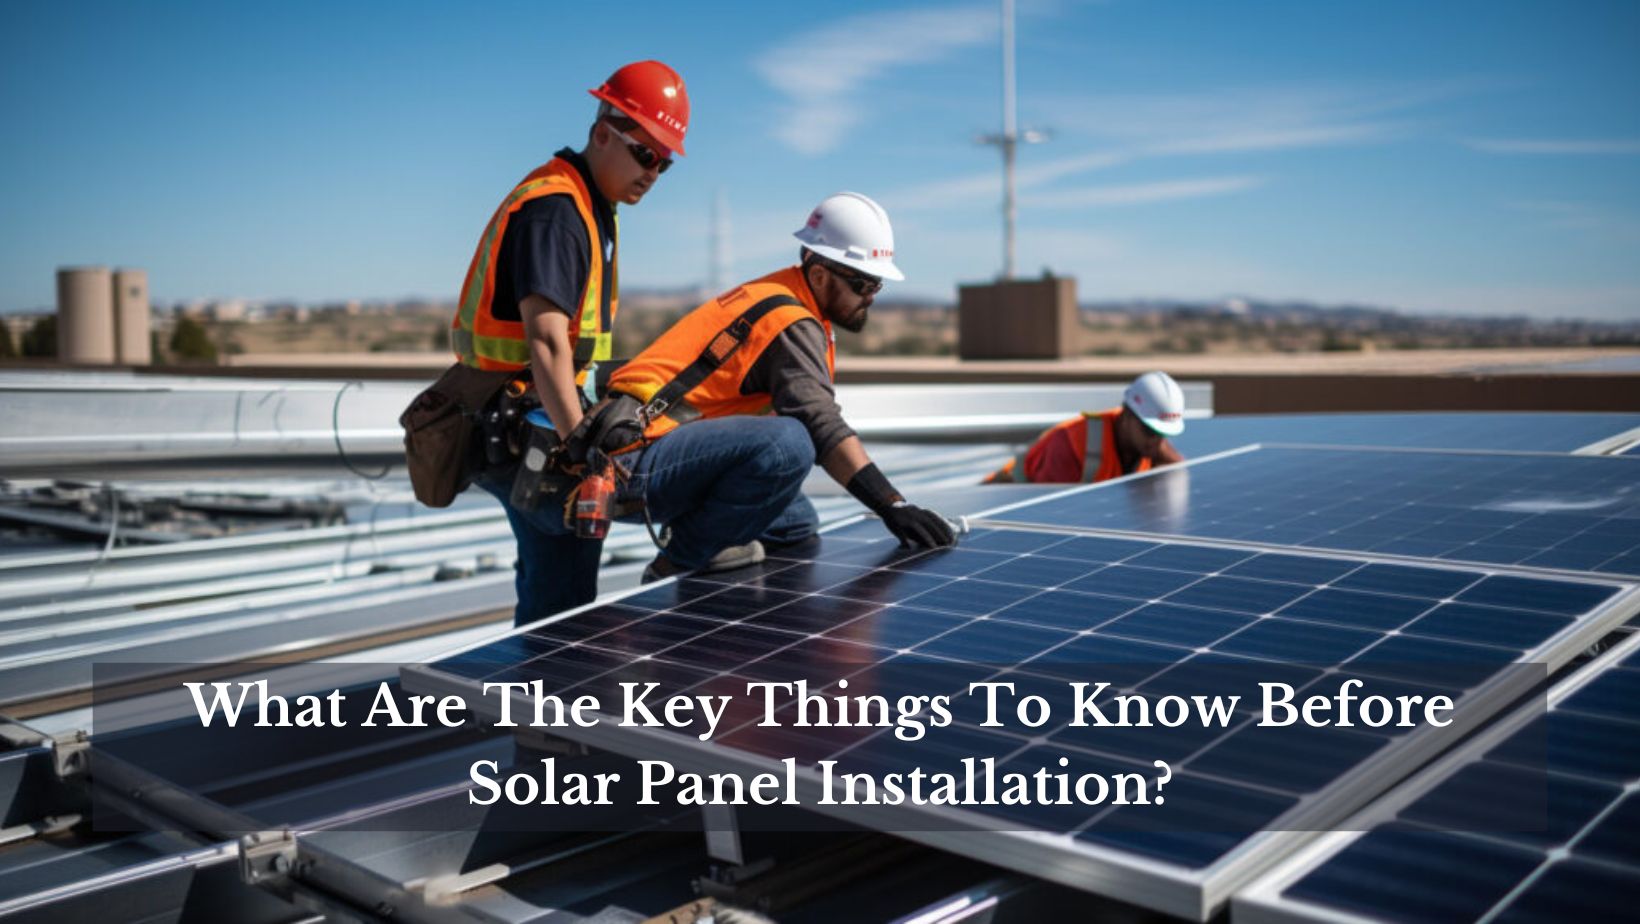 What Are The Key Things To Know Before Solar Panel Installation?